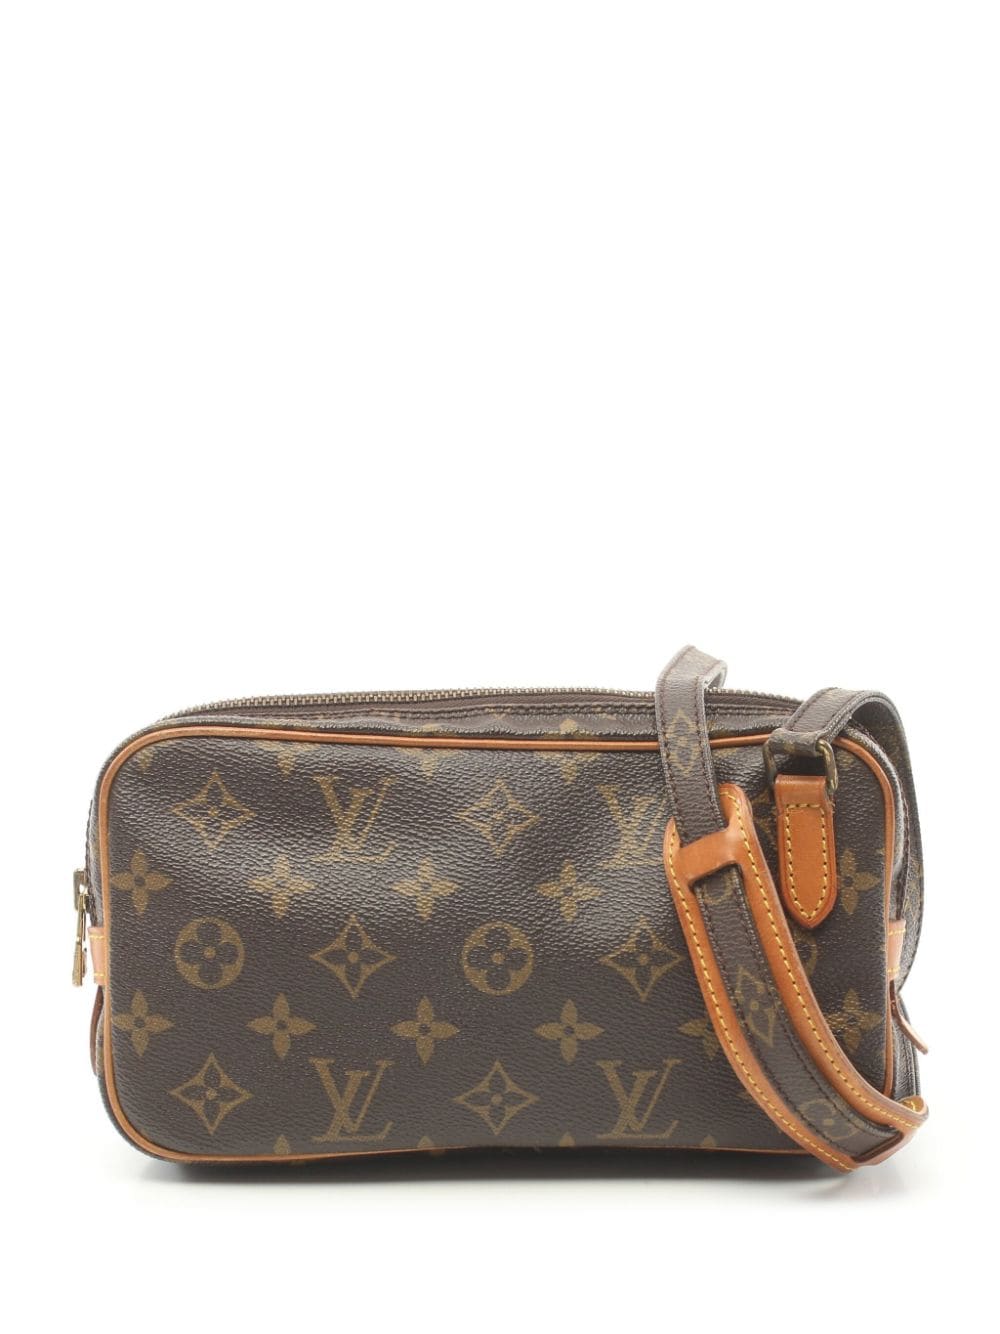 Pre-owned Louis Vuitton 1986 Marly Bandouliere Shoulder Bag In Brown